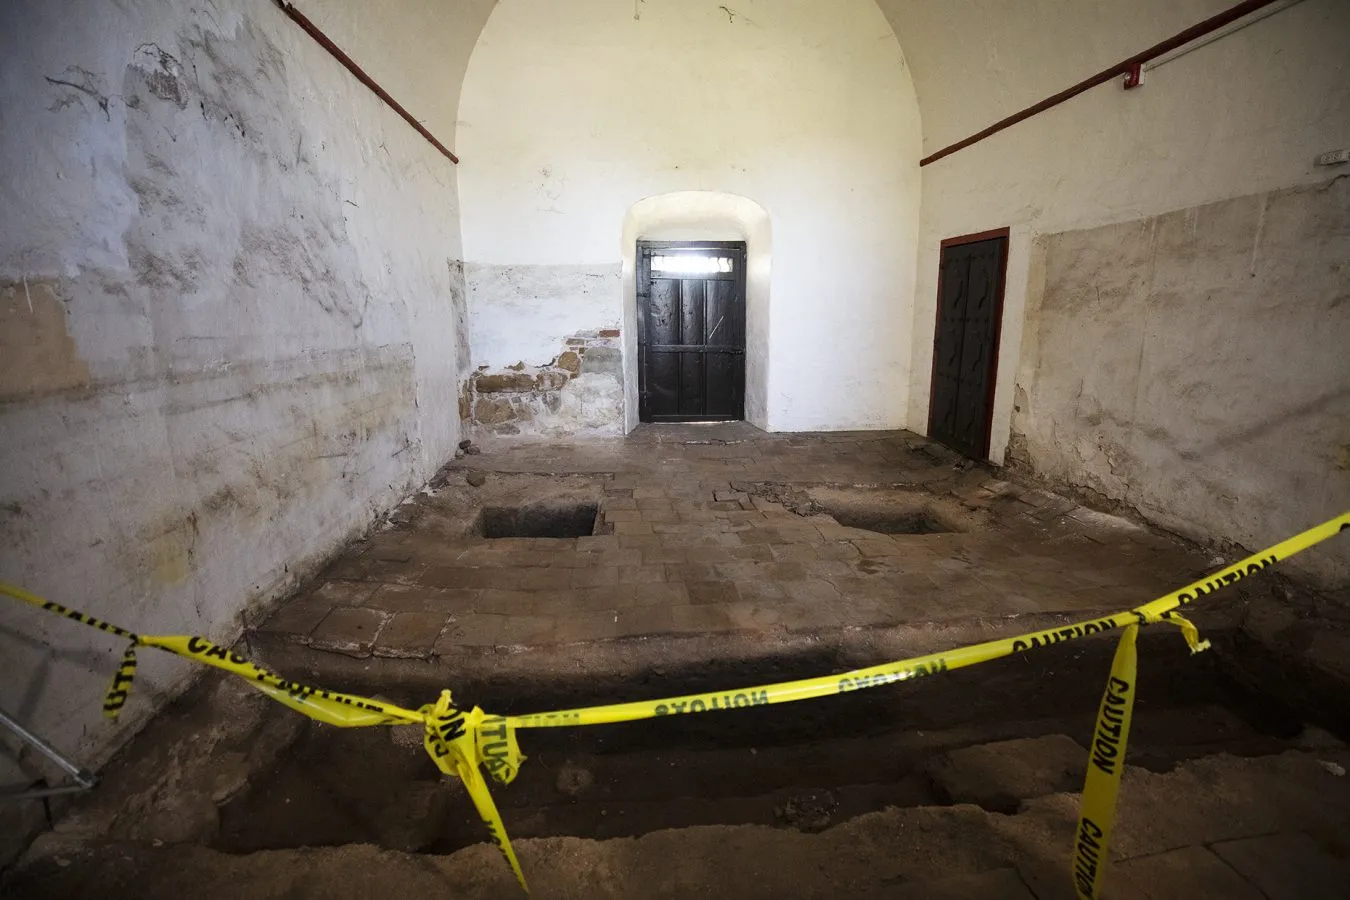 The thousands of gallons of water used to put out the fire last July caused the floor of the mission’s sacristy to sink, revealing layers of stone and brick used to first build the church. No human remains have been found in excavations since the fire. / Victor Alemán